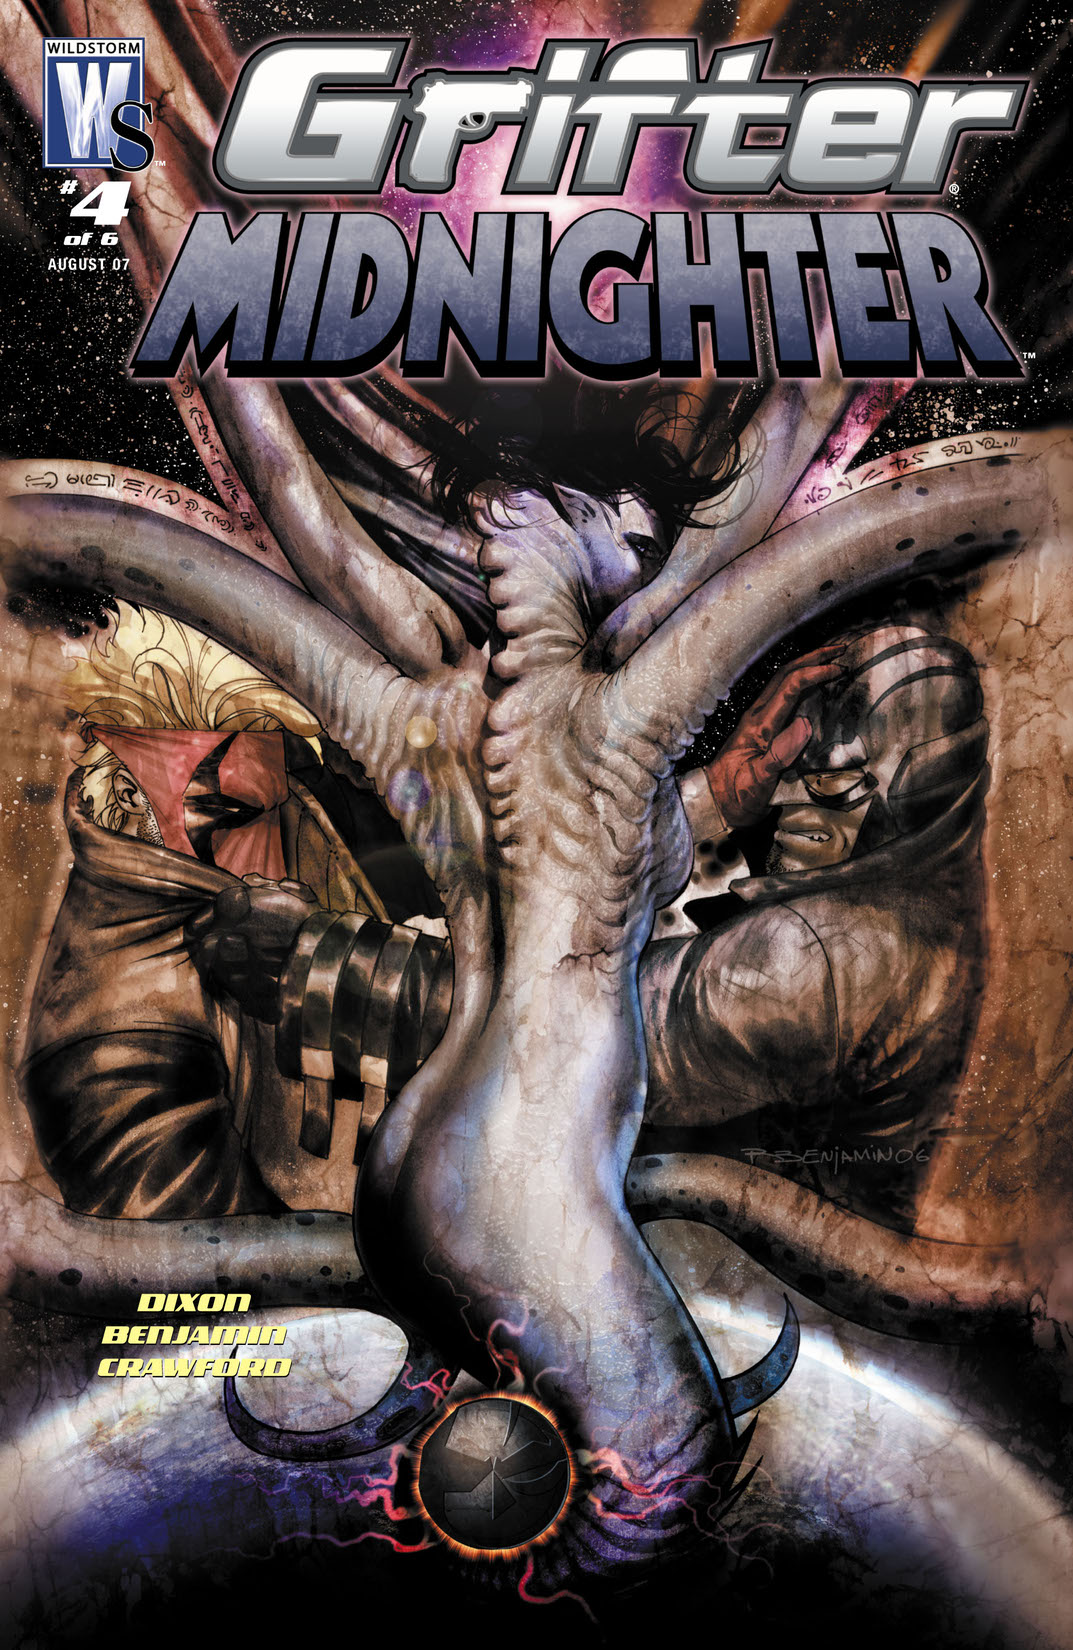 Grifter & Midnighter #4 preview images